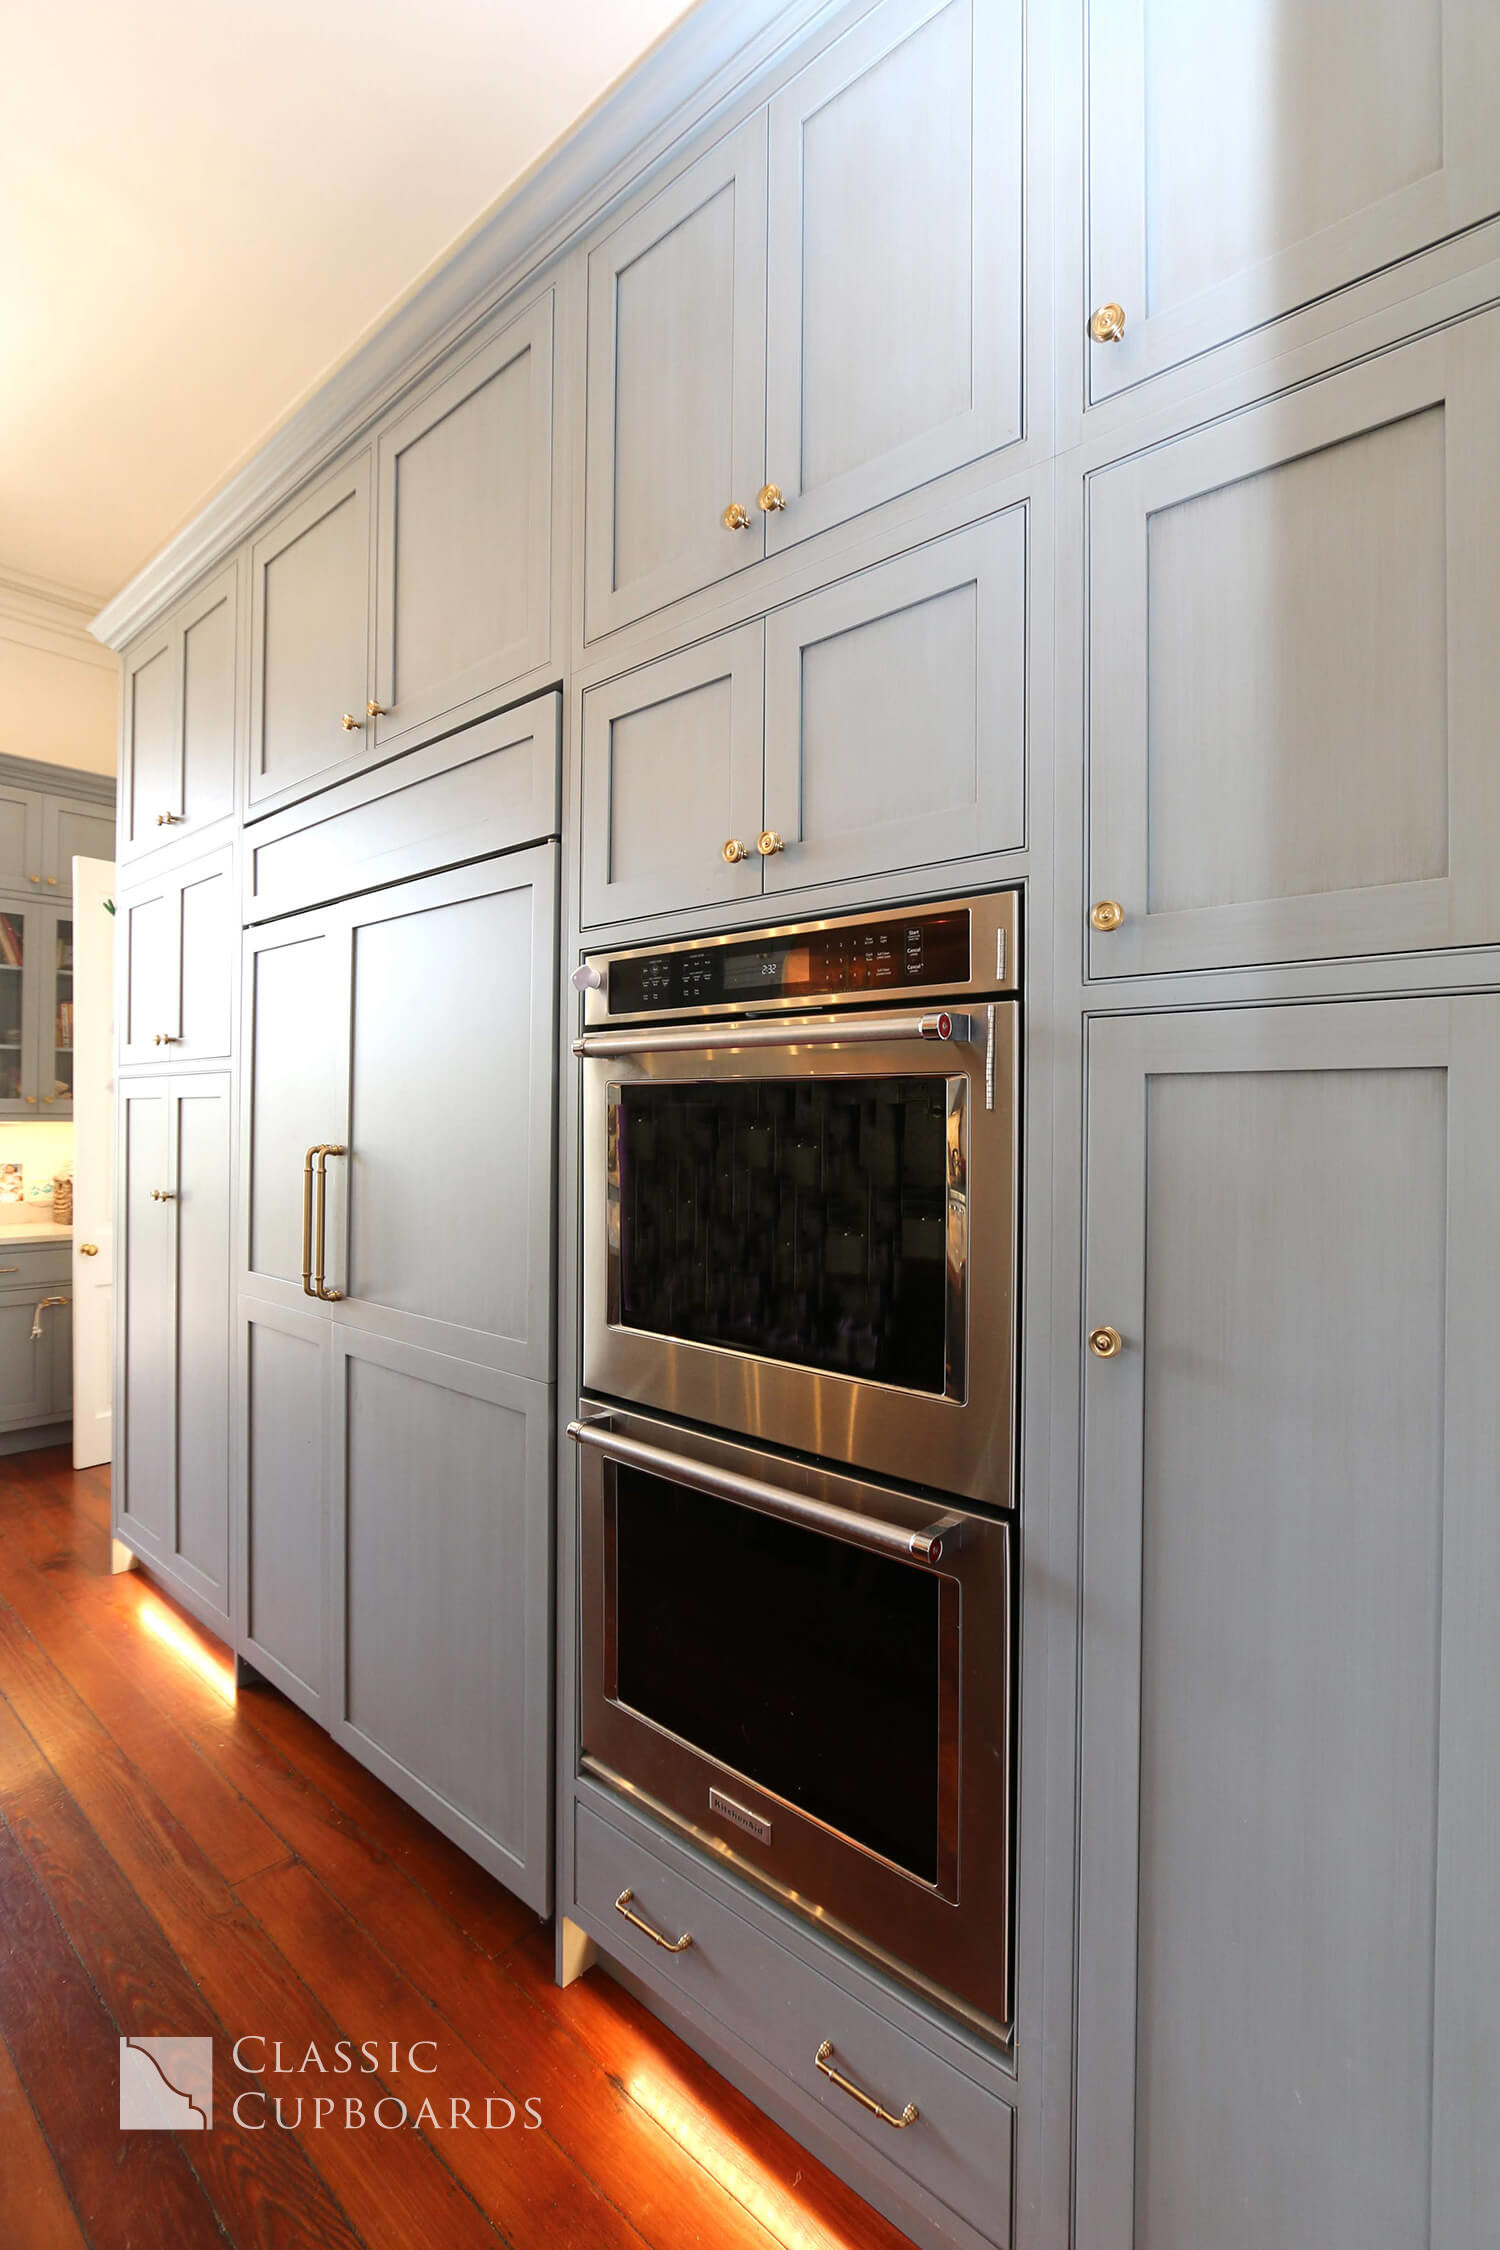 kitchen appliances in custom cabinetry